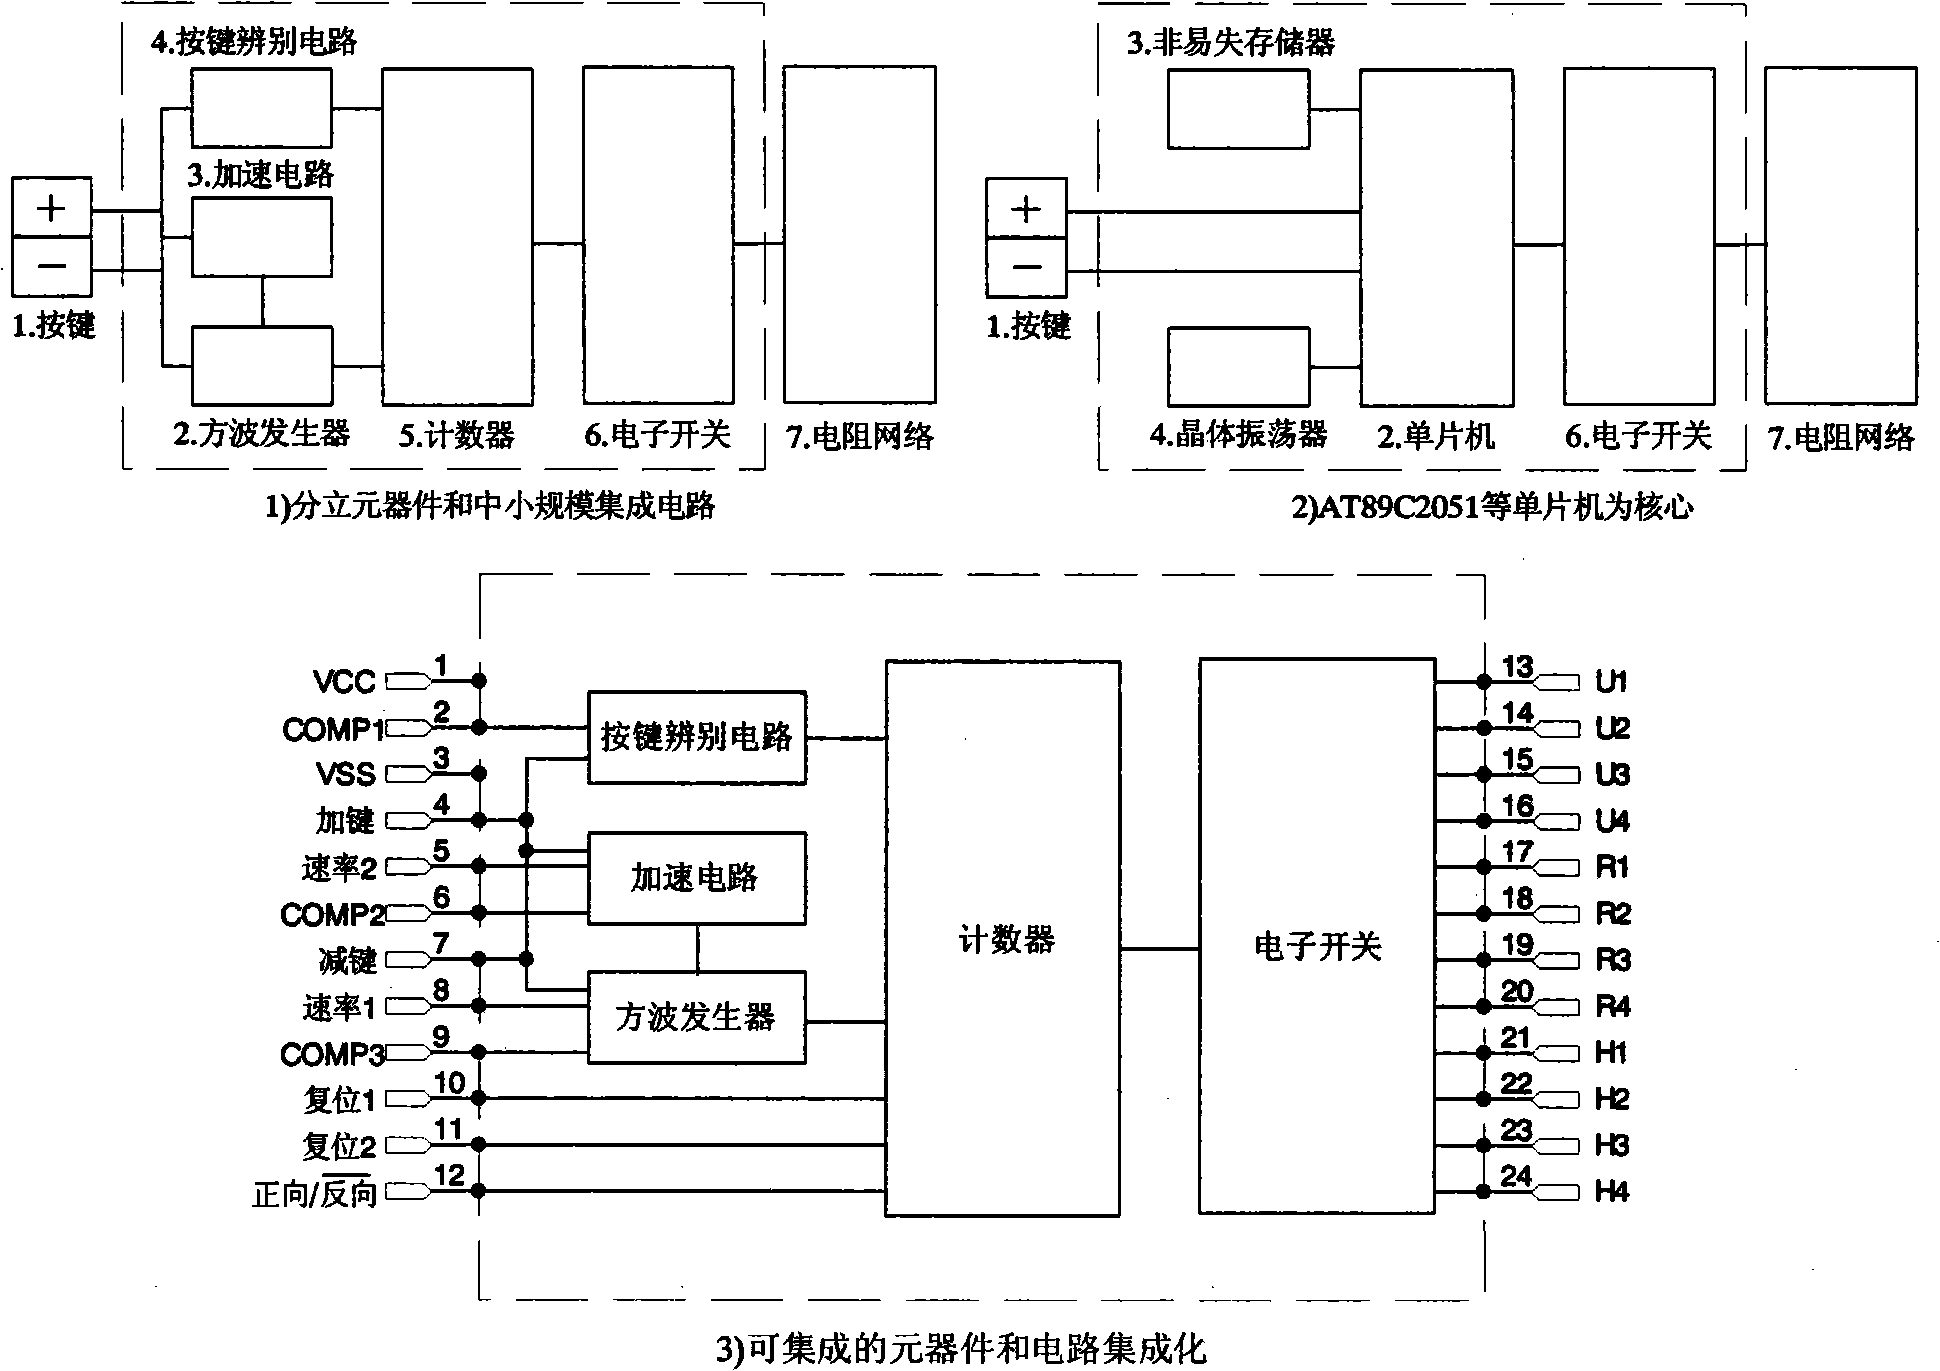 Electronic potentiometer module having complete operating characteristic and function